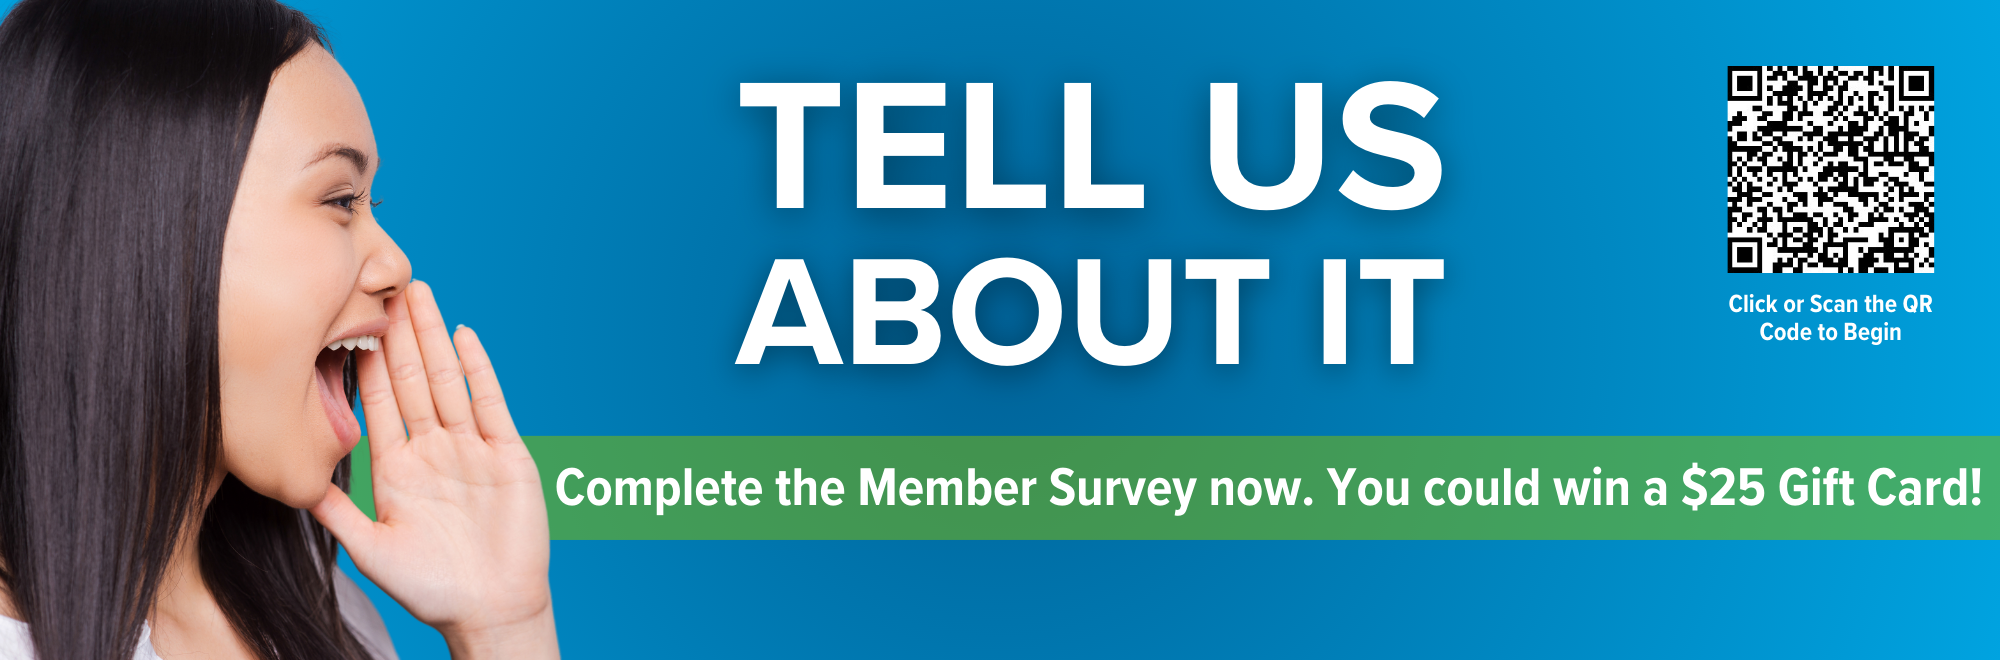 Please take our annual member survey. You could win a $25 gift card.